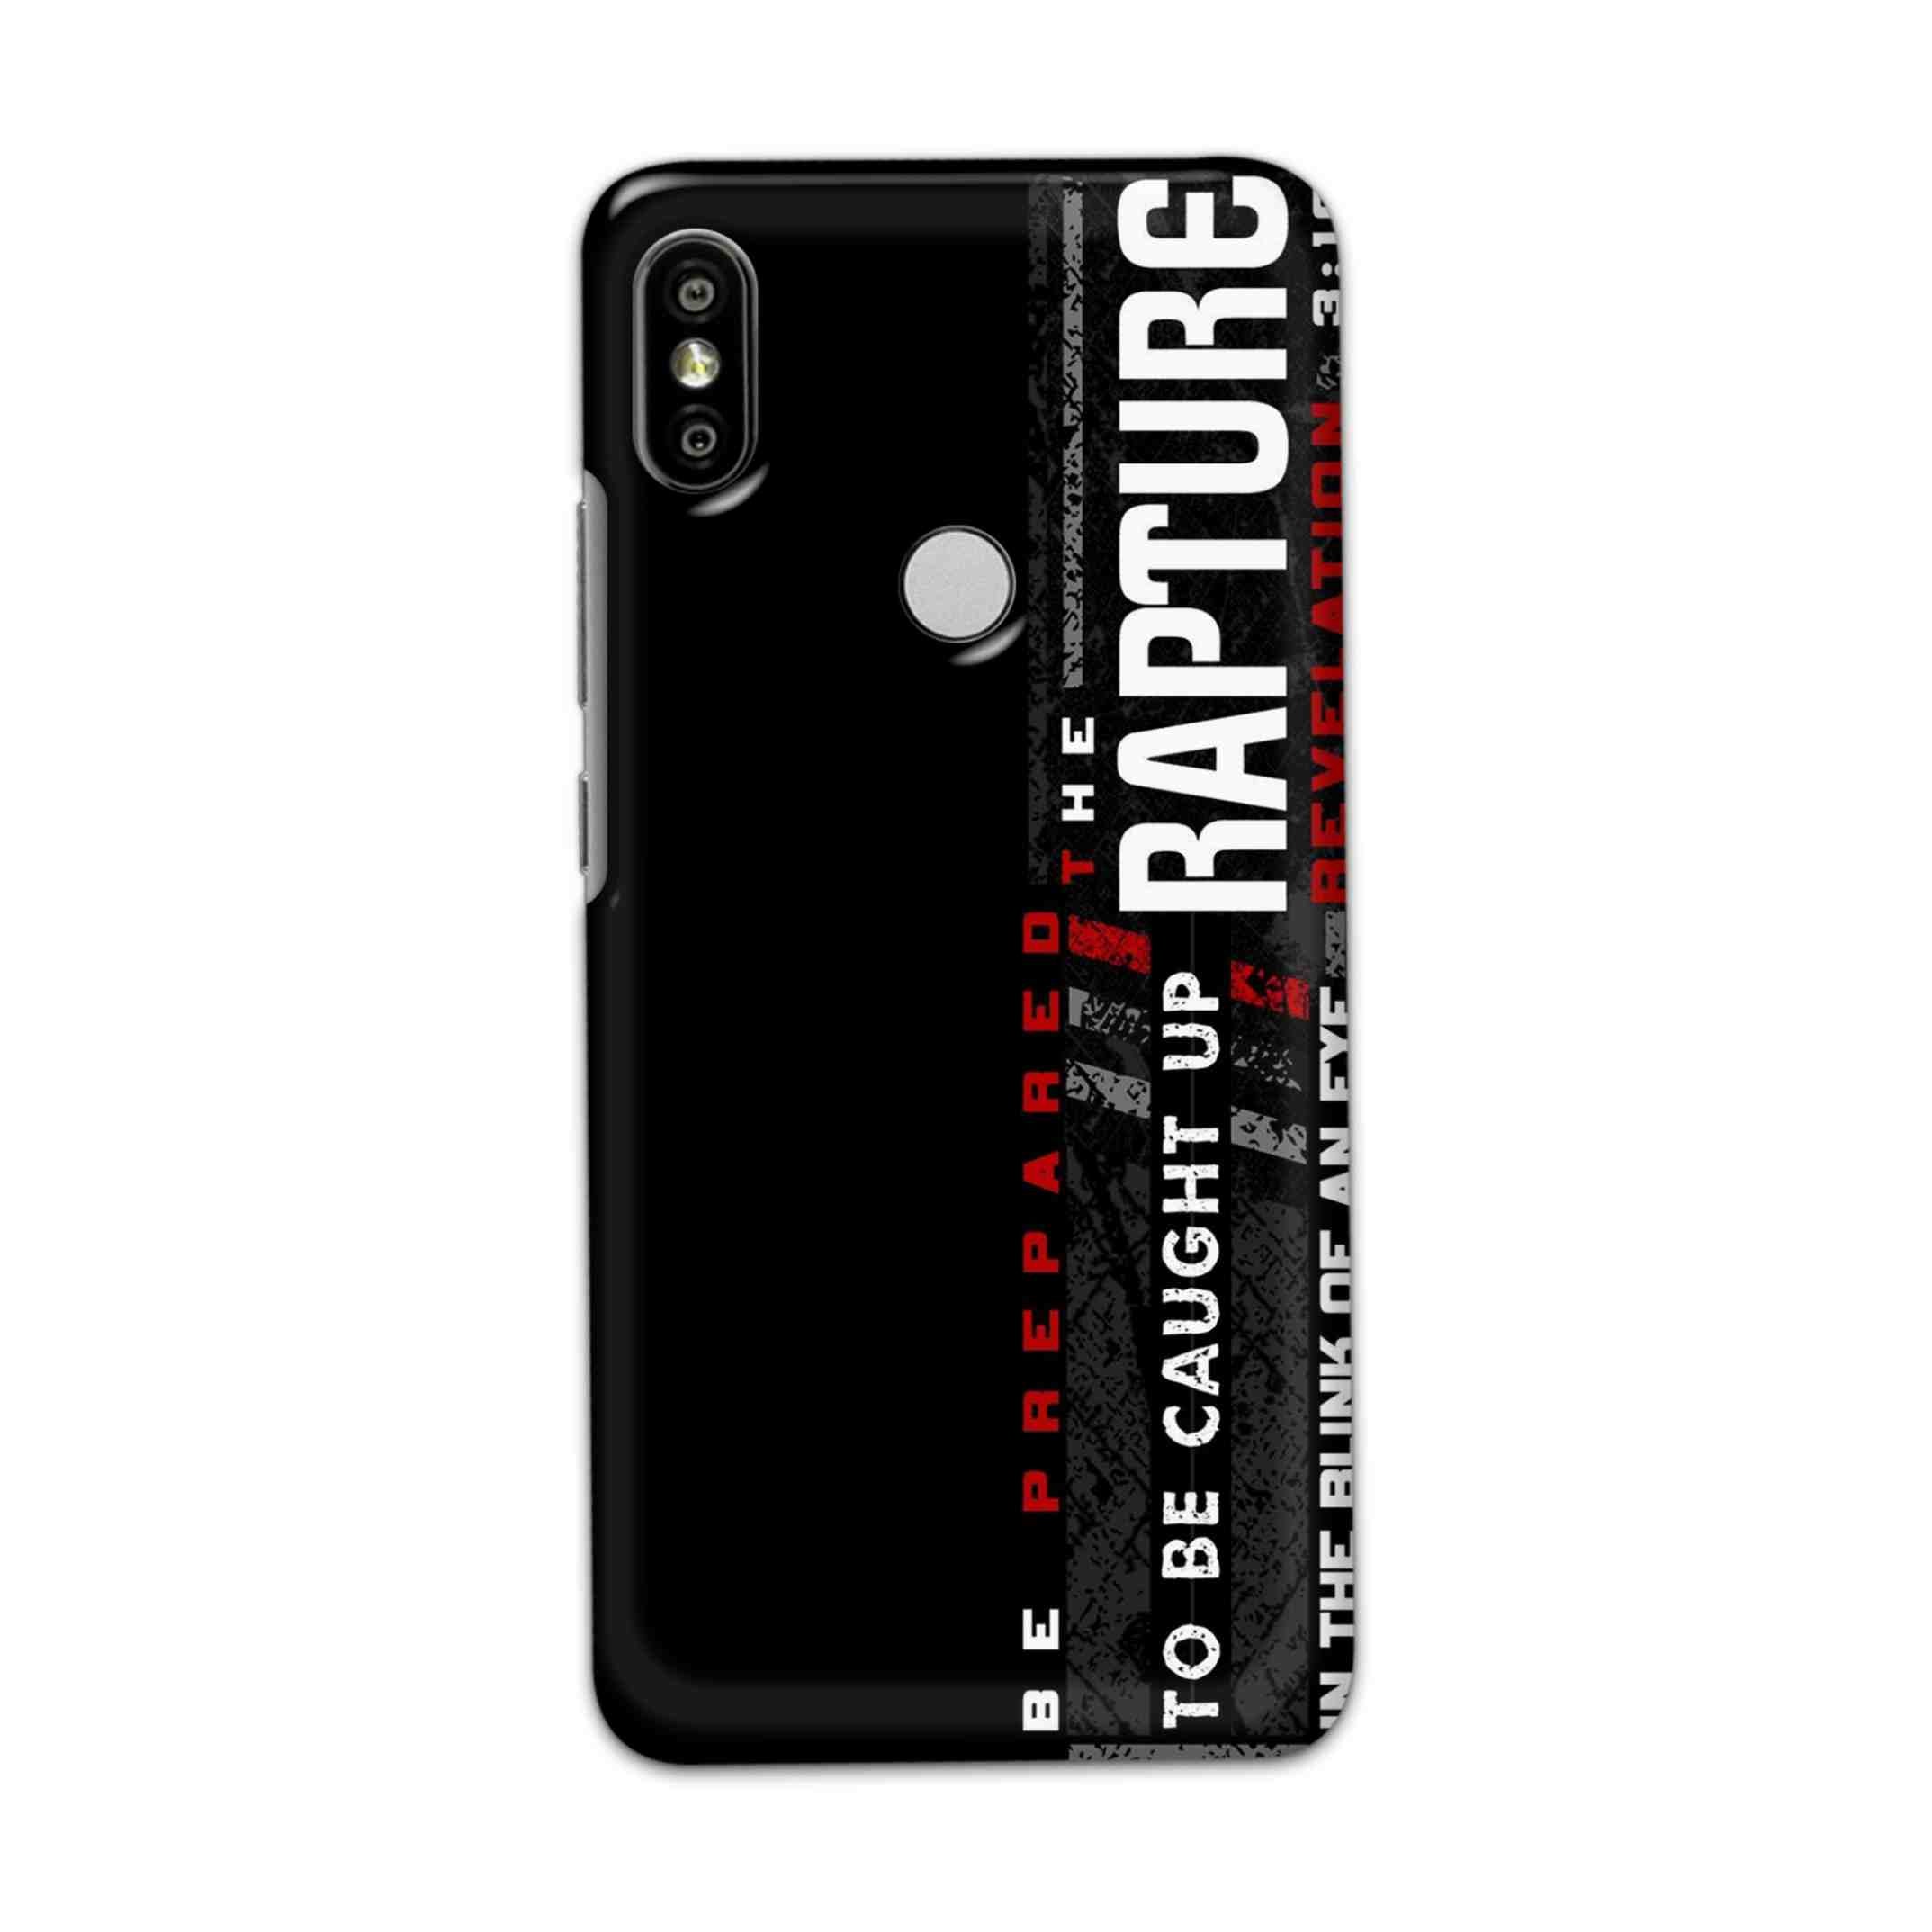 Buy Rapture Hard Back Mobile Phone Case Cover For Redmi S2 / Y2 Online